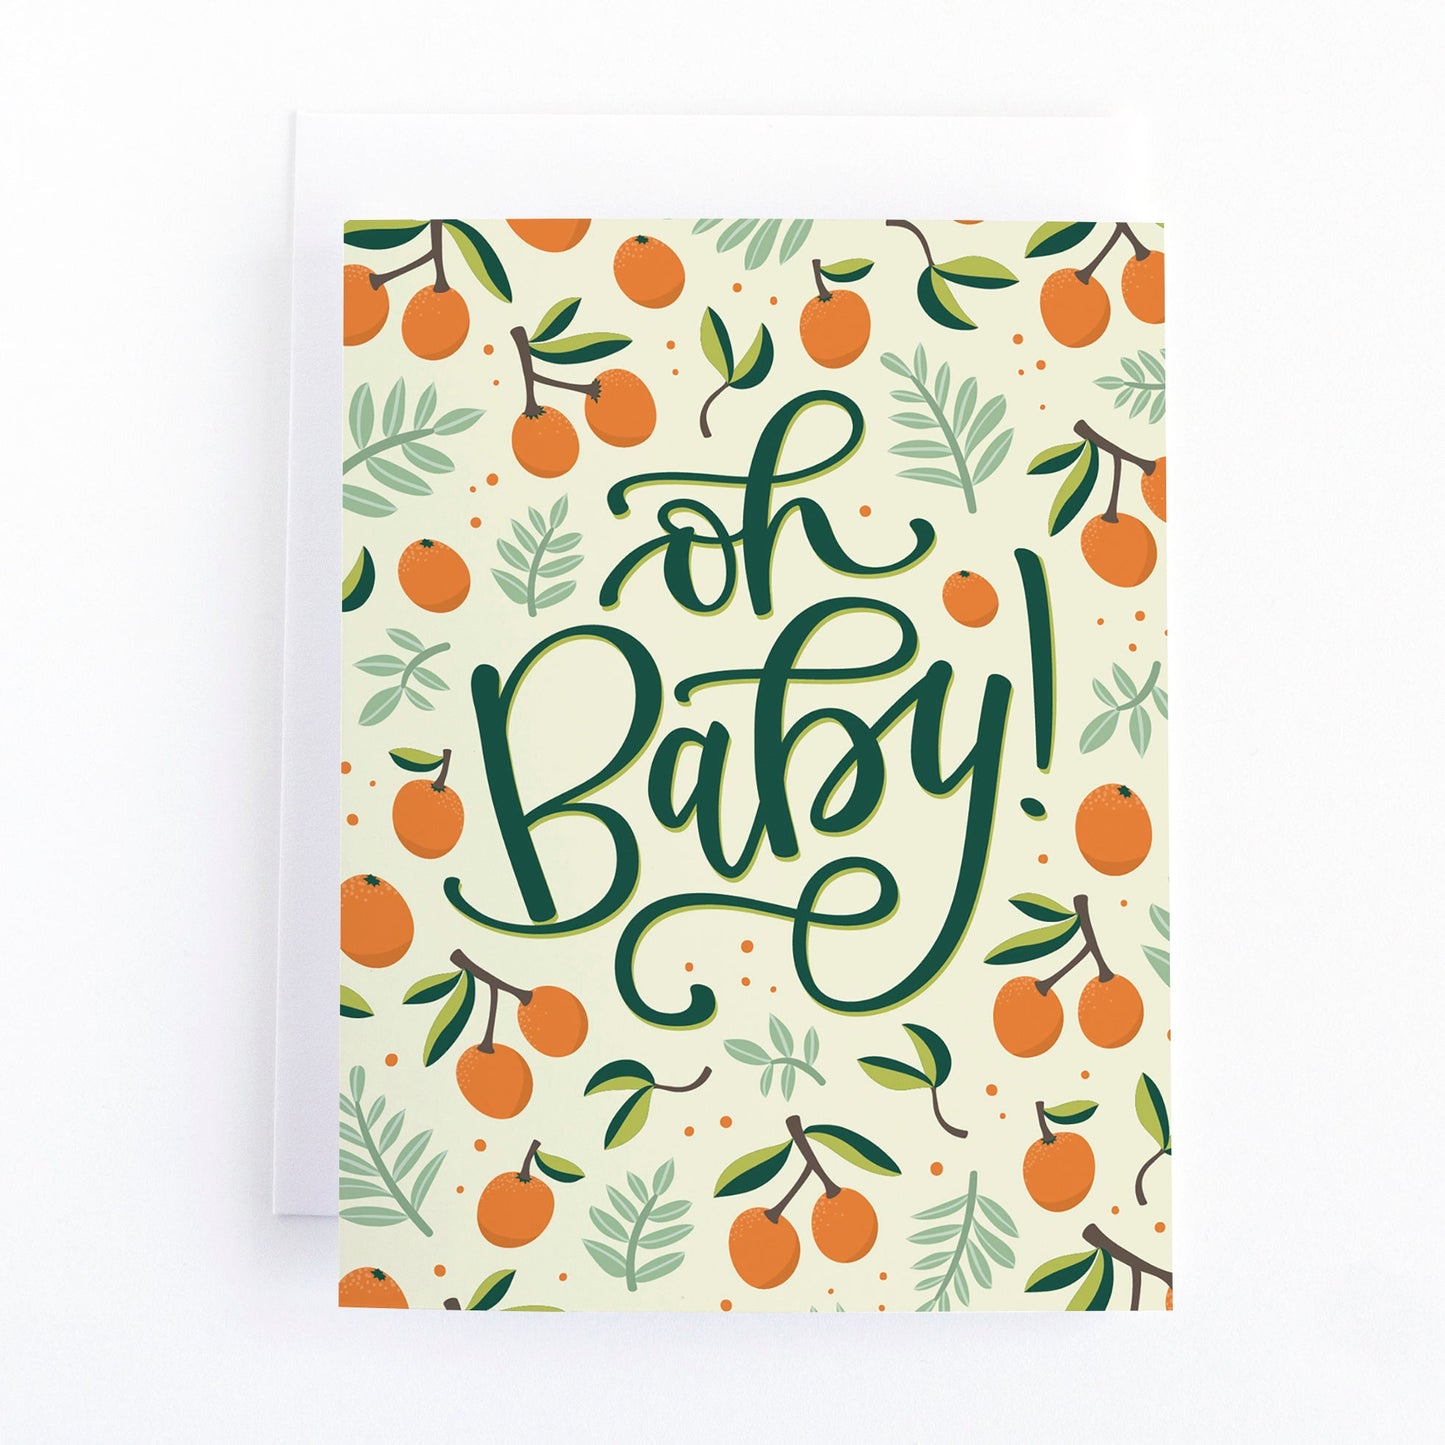 Gender Neautral New Baby Card with greenery and oranges that says Oh Baby! in hand lettered script